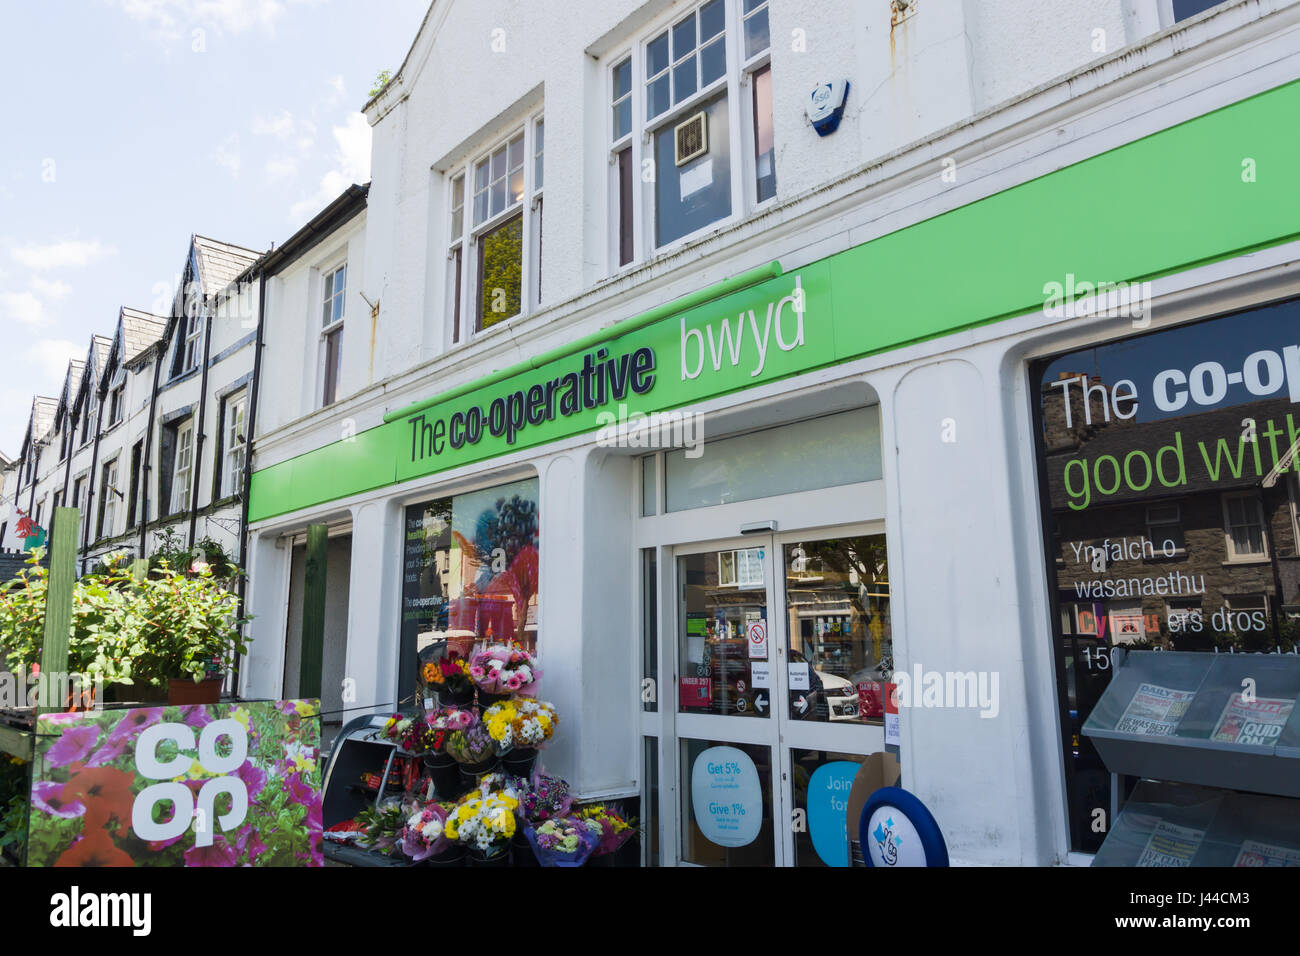 Co-operative food shop in Bala Wales part of the nationwide chain established in 1844 with over 4200 outlets through out the United Kingdom Stock Photo